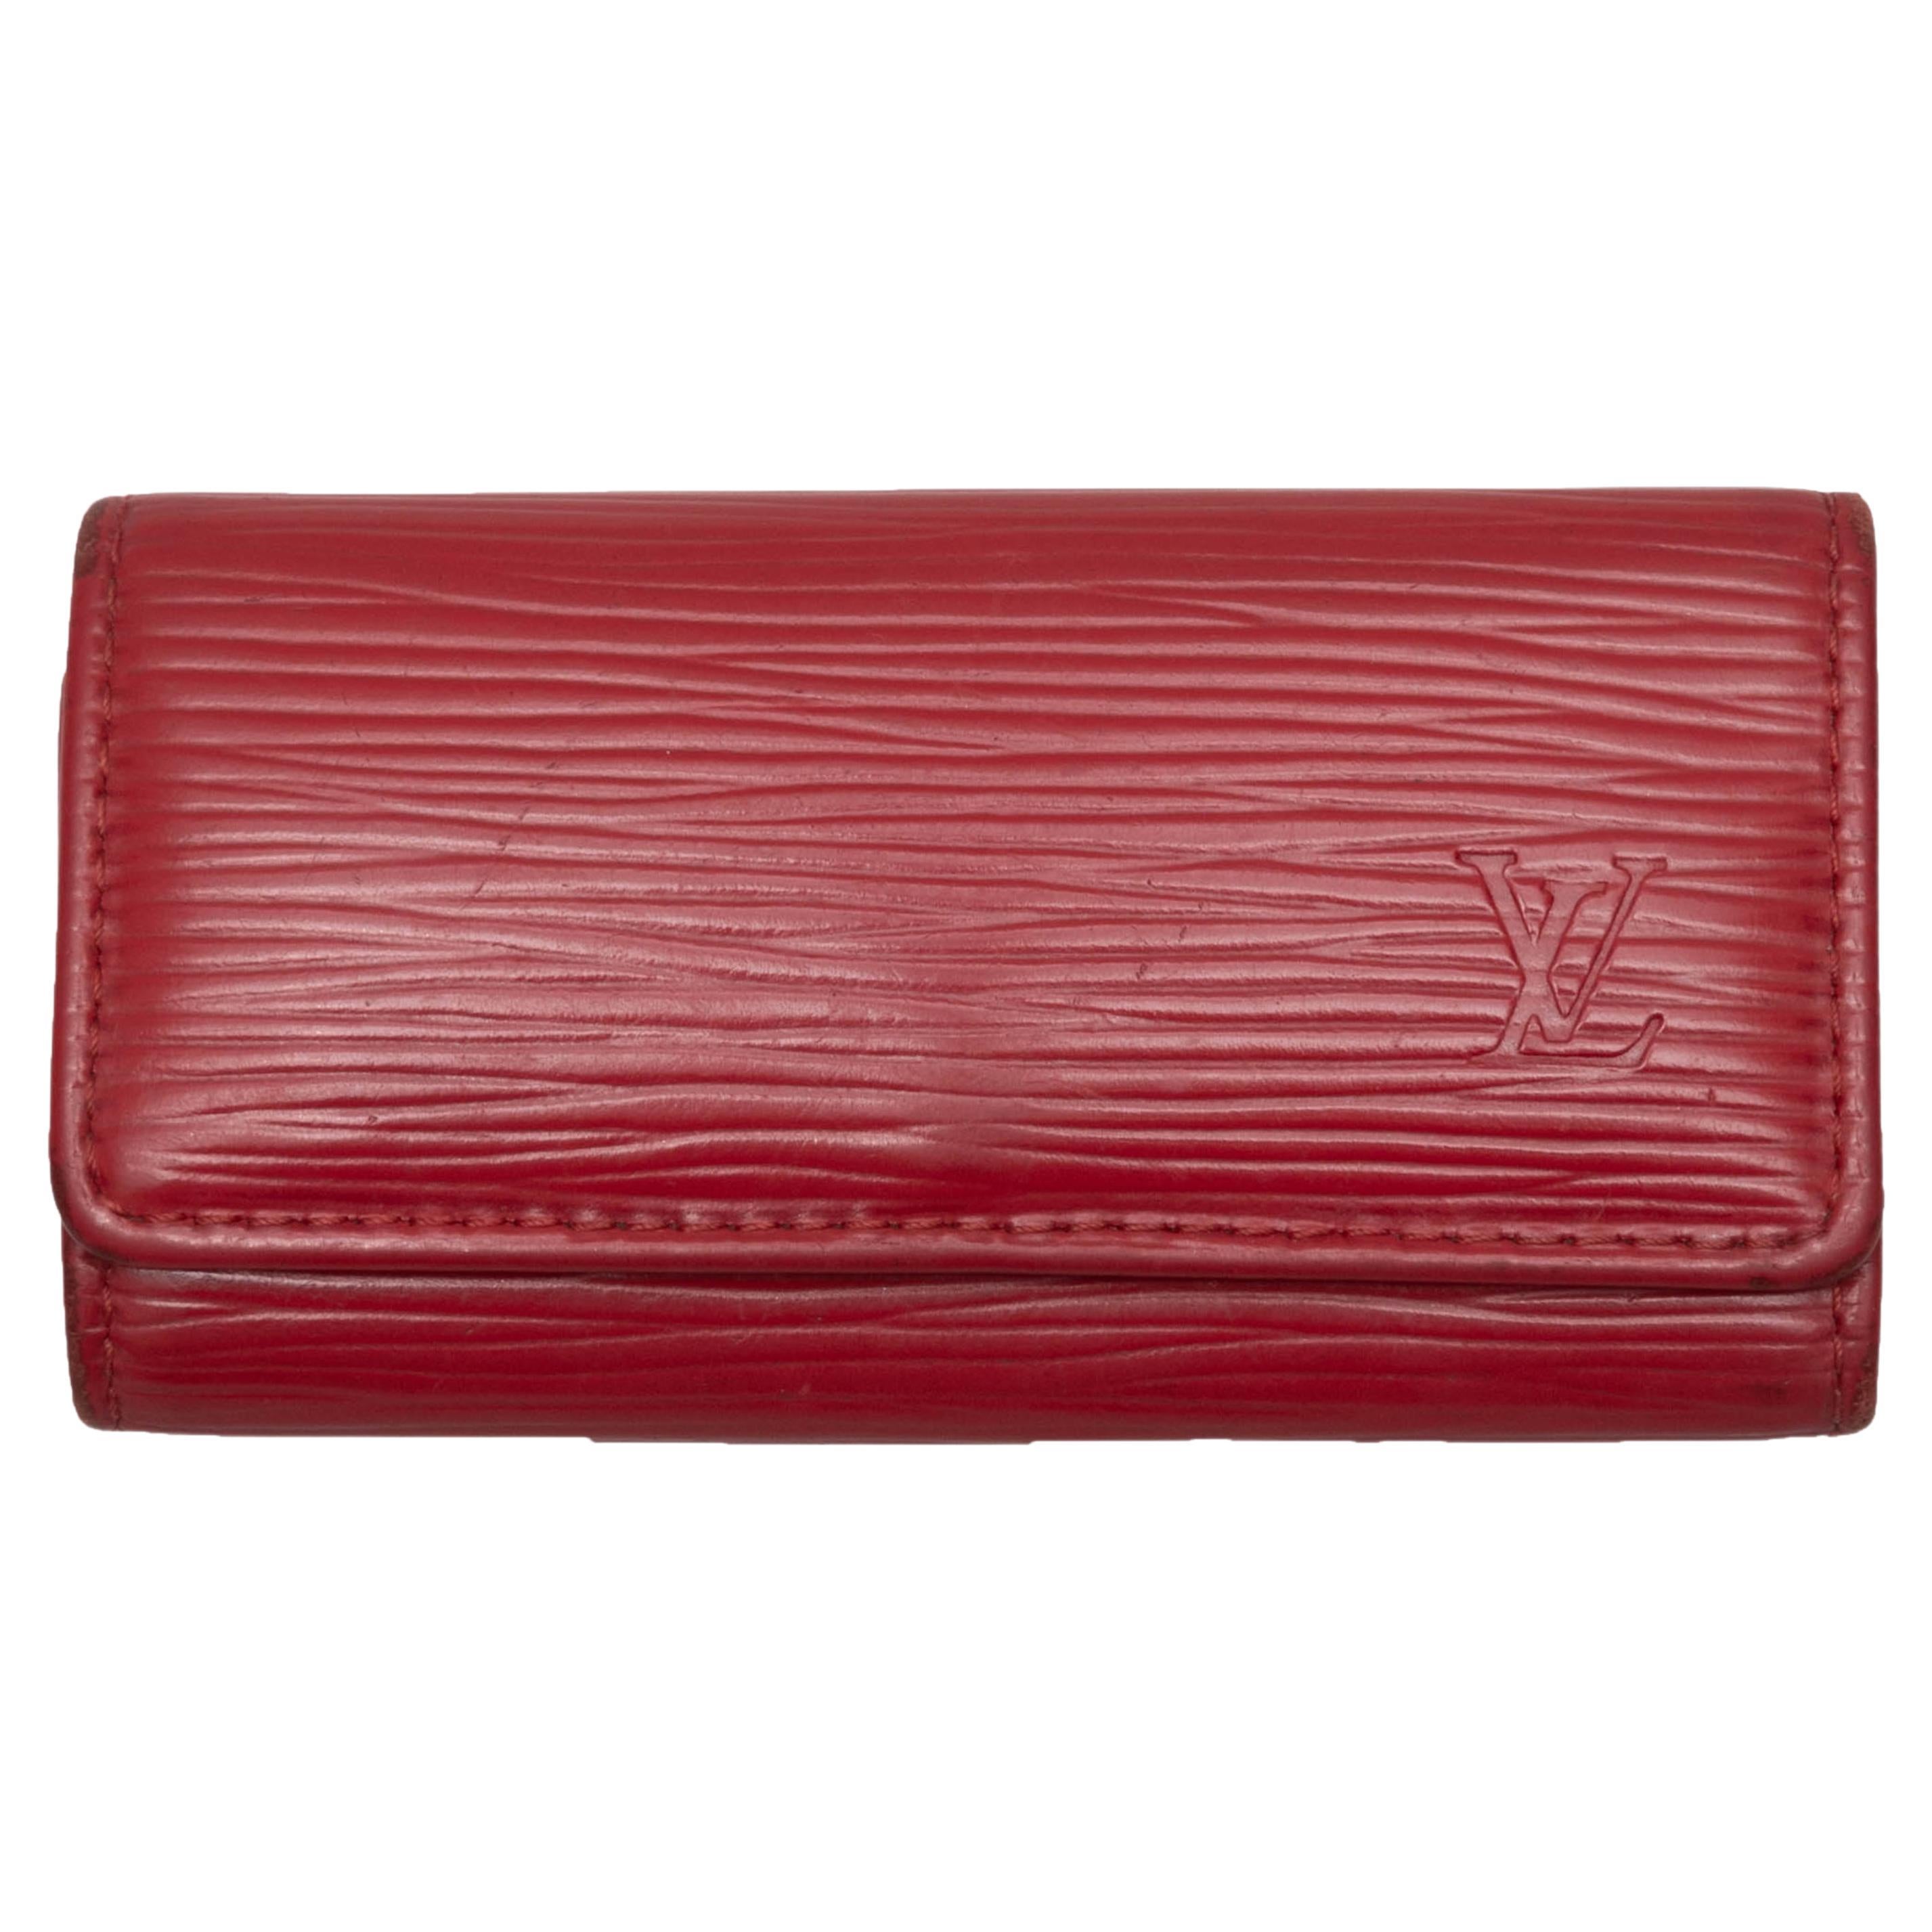 Red Louis Vuitton Epi Leather Key Holder For Sale